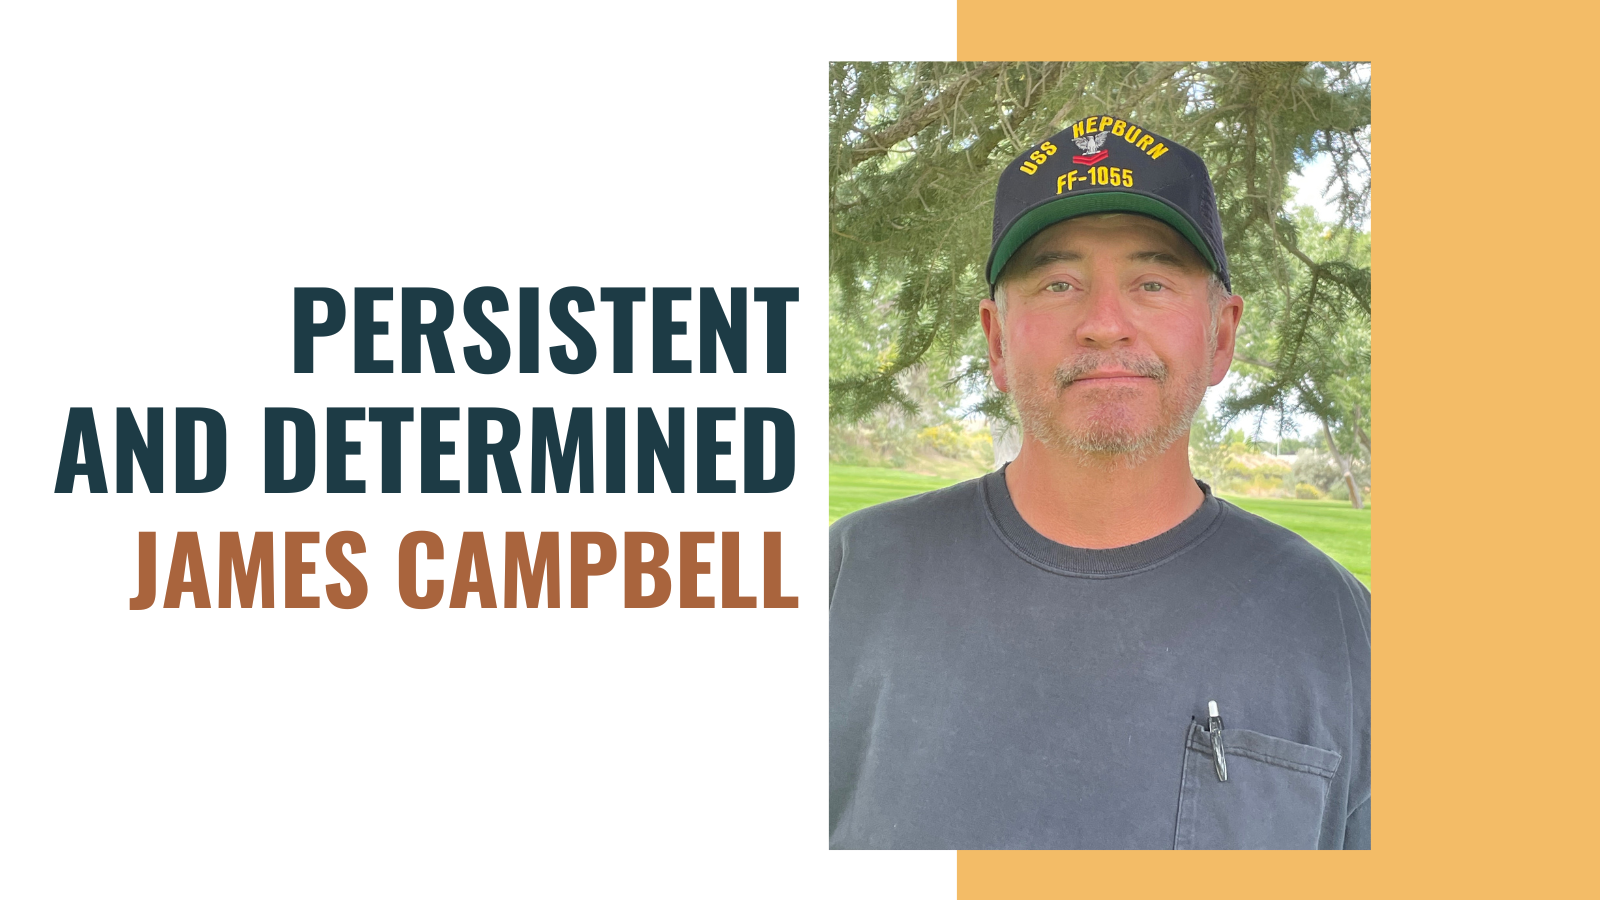 James Cambell - Persistent and Determined